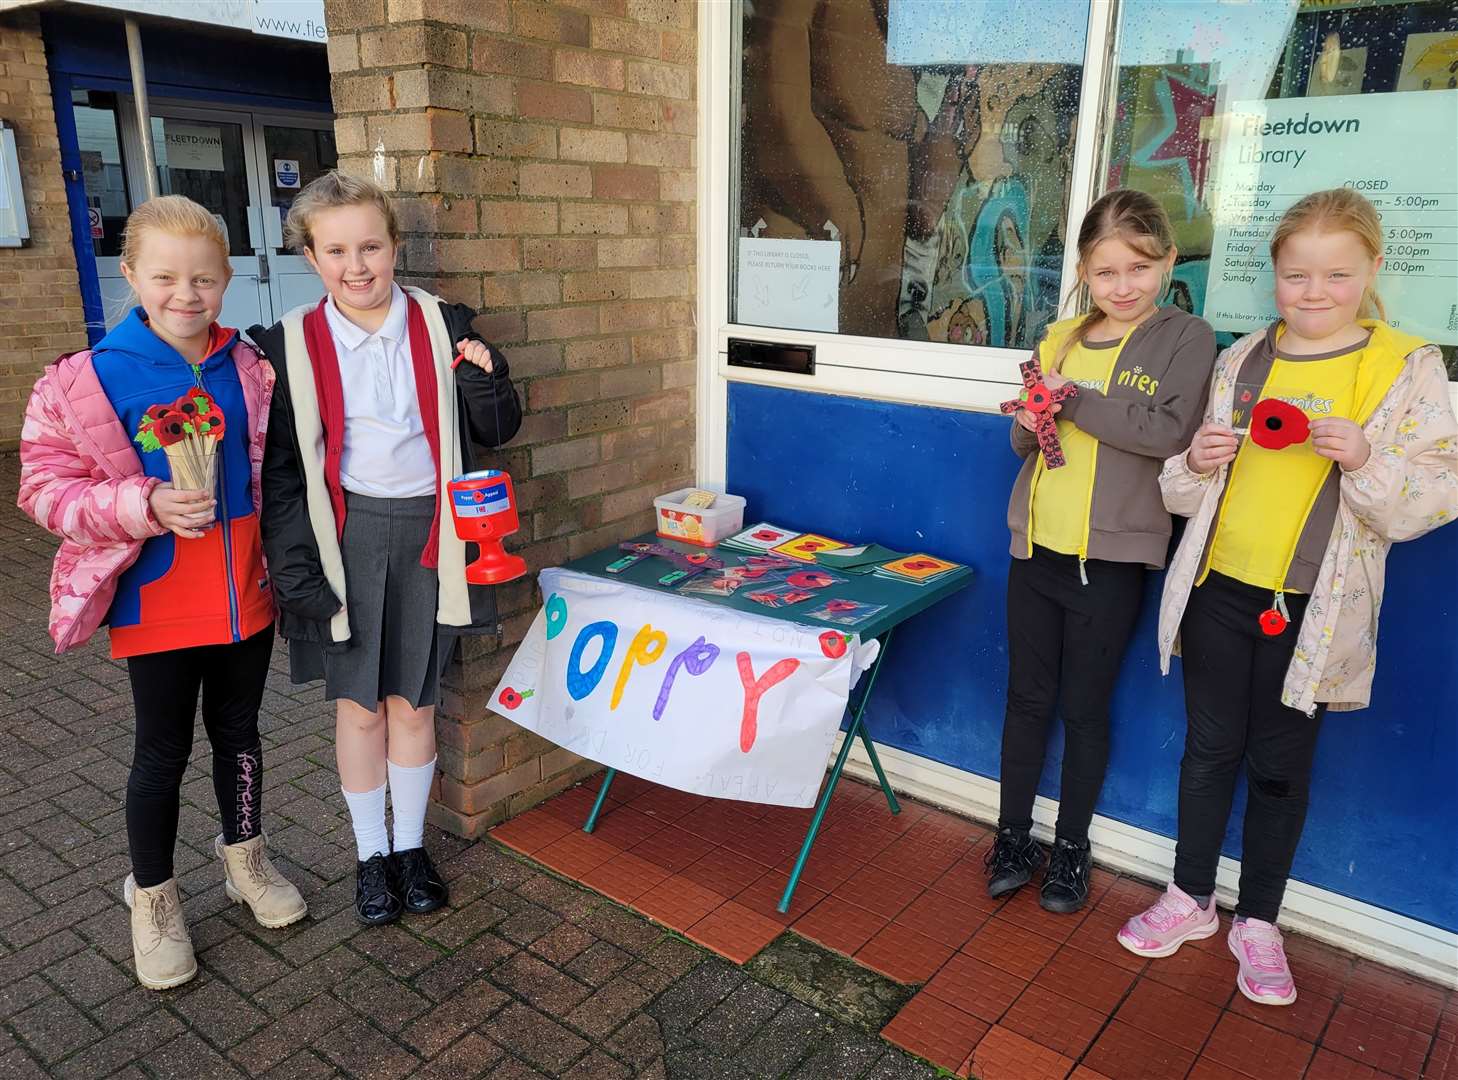 Jessica and Alex Salter, pictured here with two school friends at Tuesday's stall outside Fleetdown Library